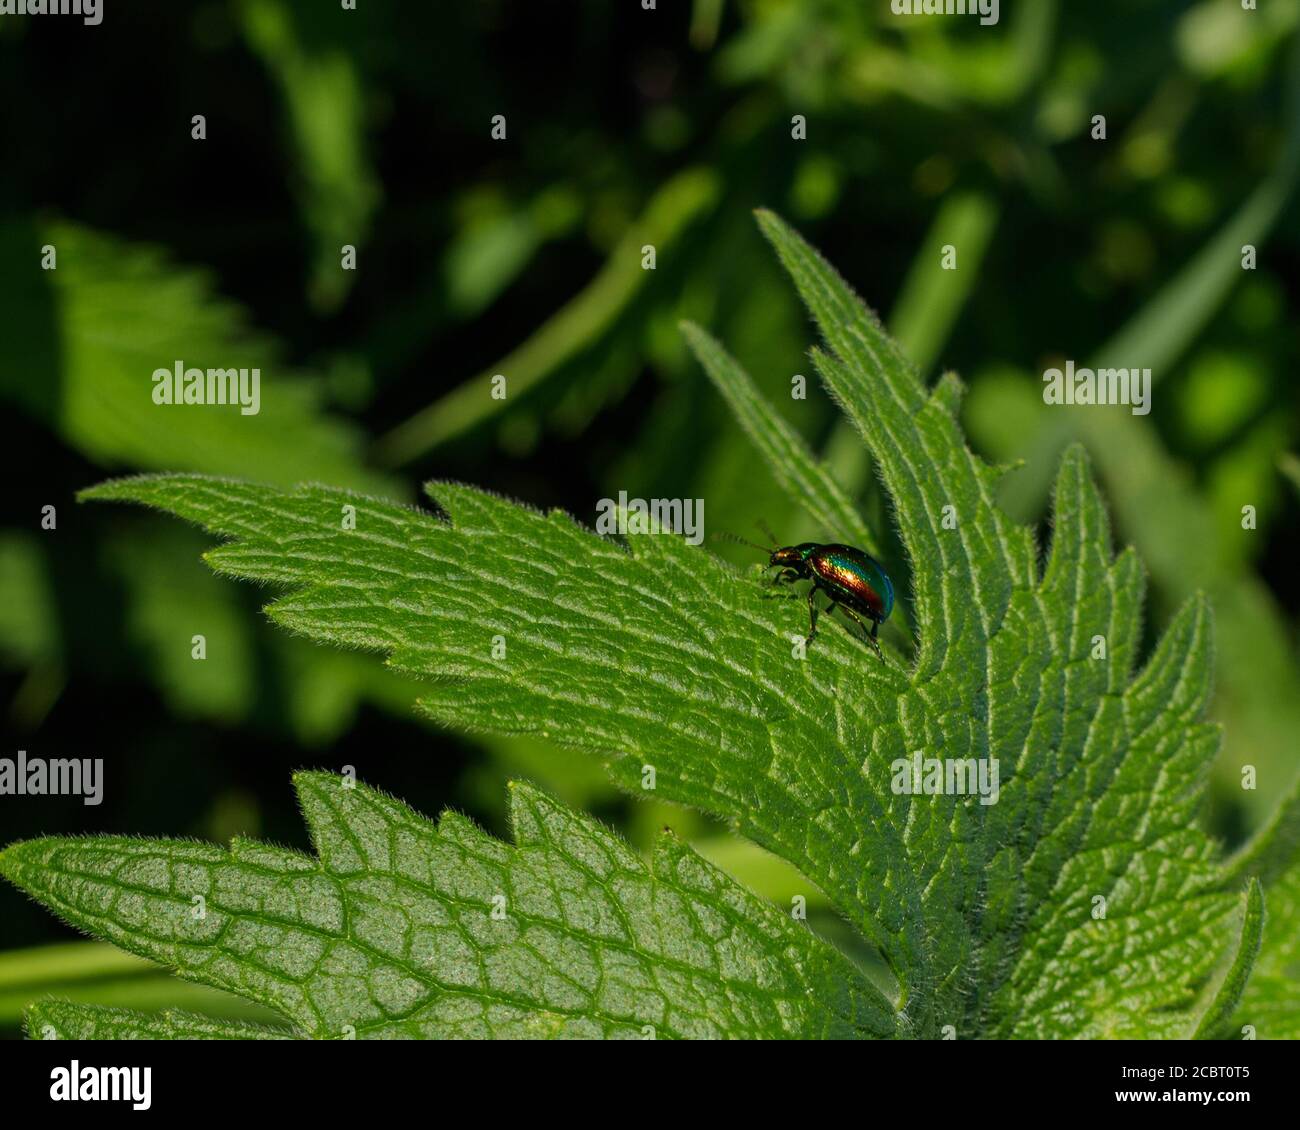 The colorful leaf beetle wanders around a green leaf of young wild plants of cannabis. View from above Stock Photo